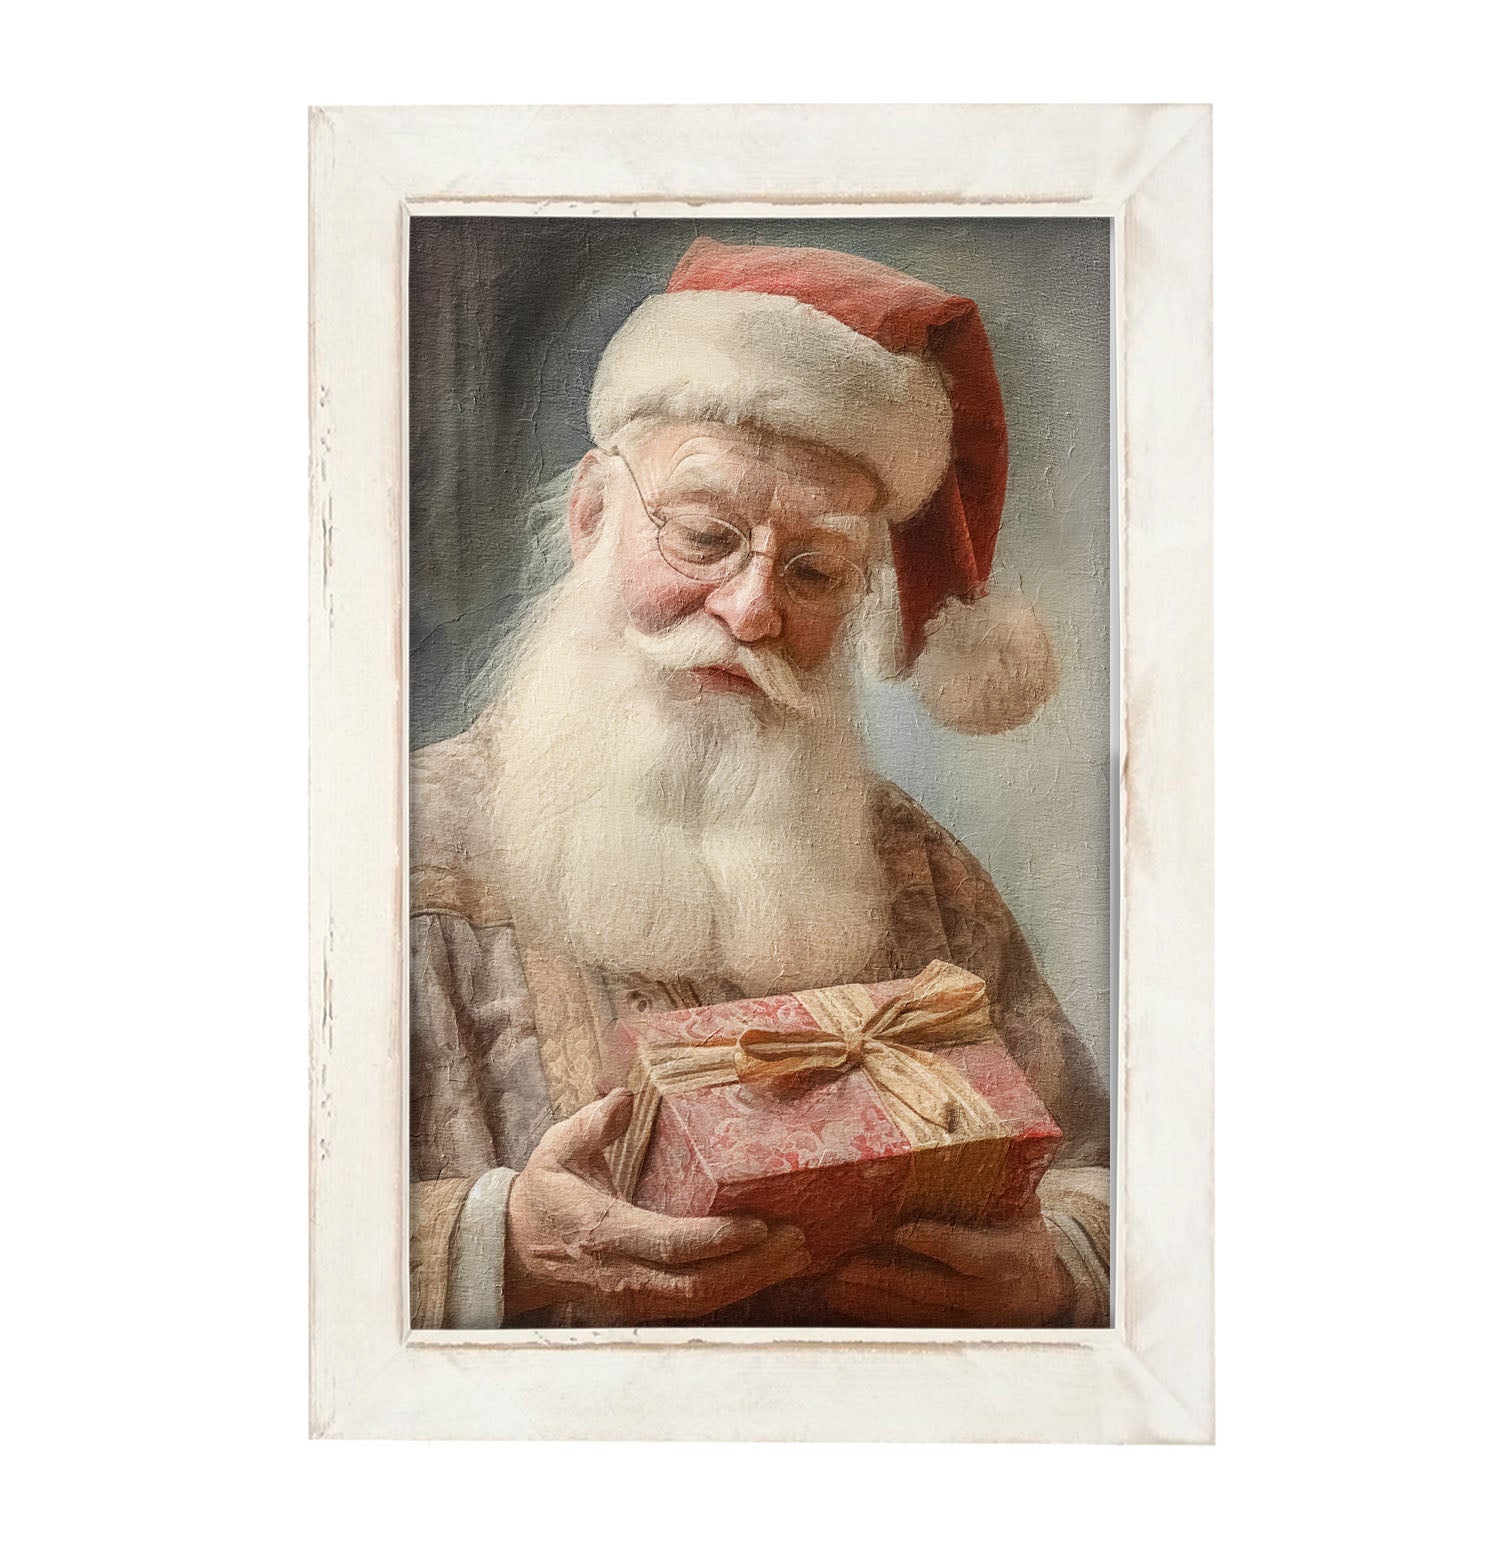 Old world Santa with glasses